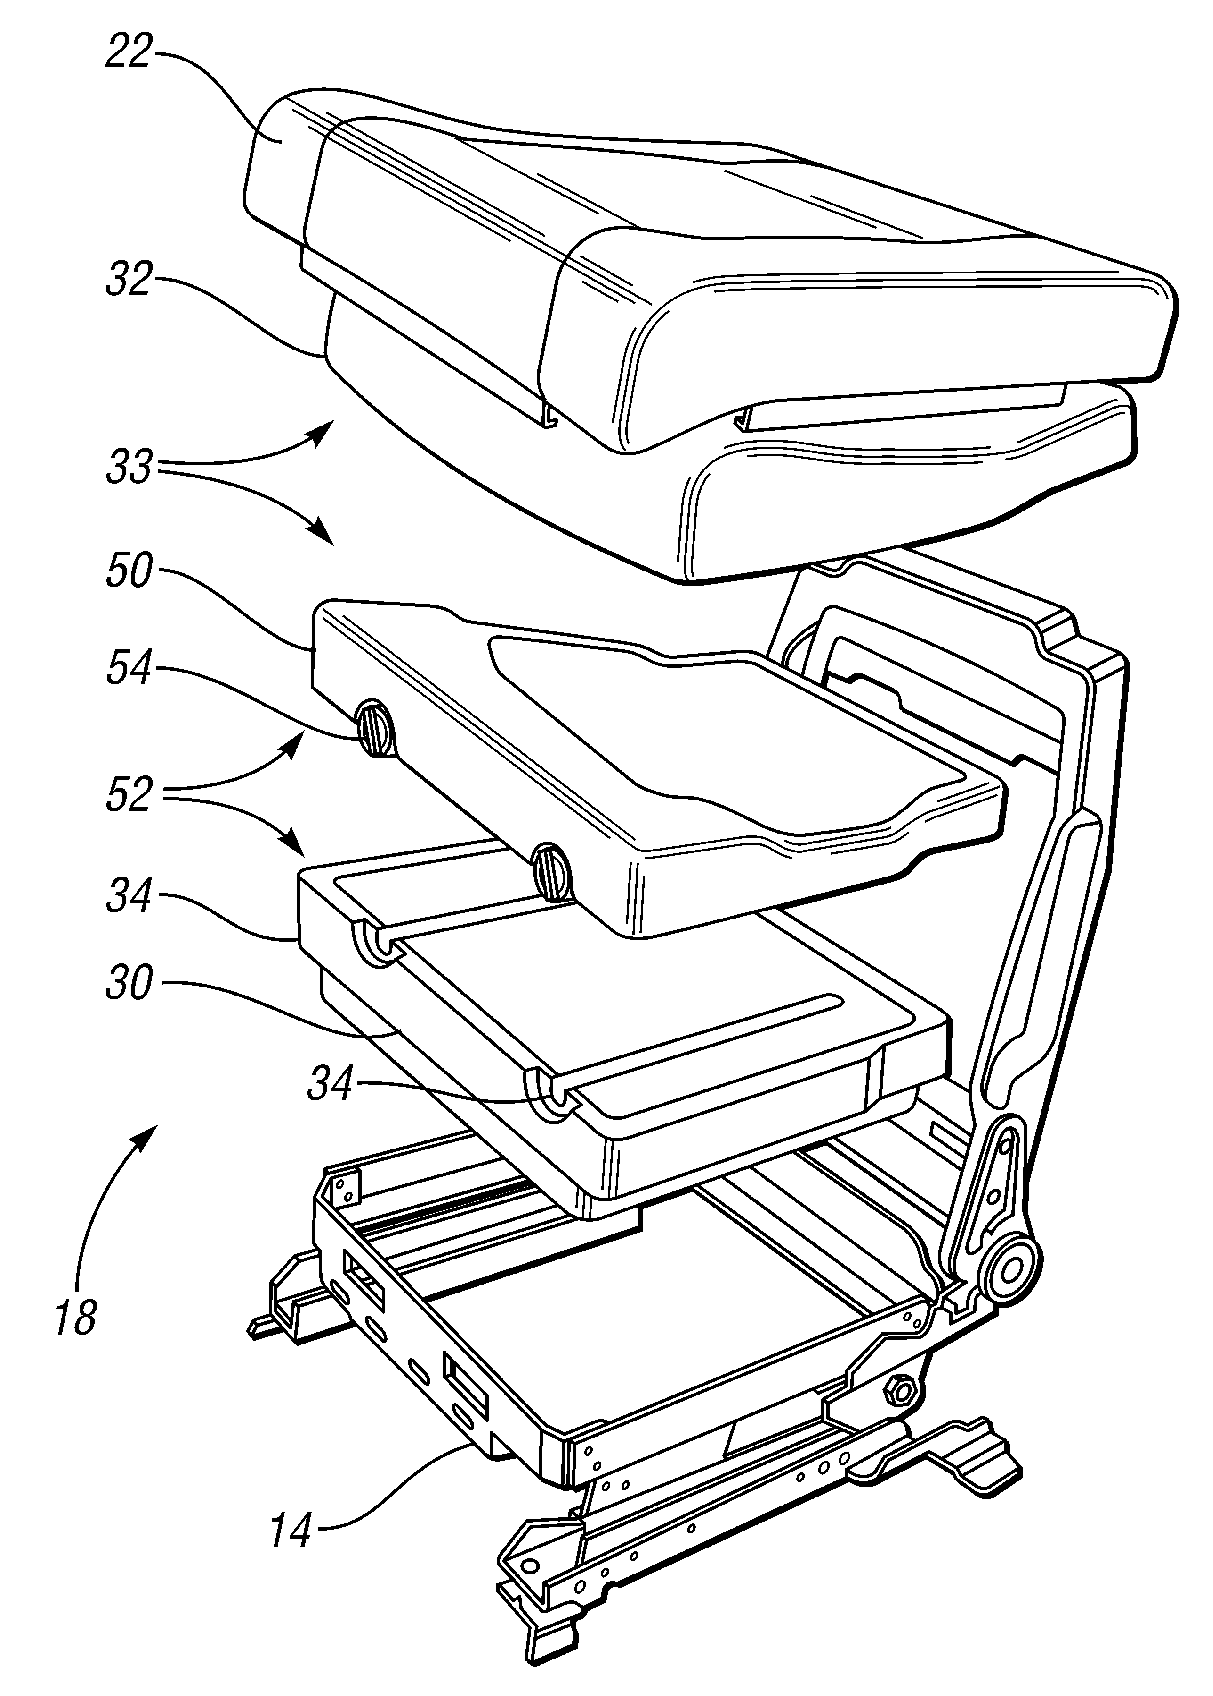 Layered seating system with attachments